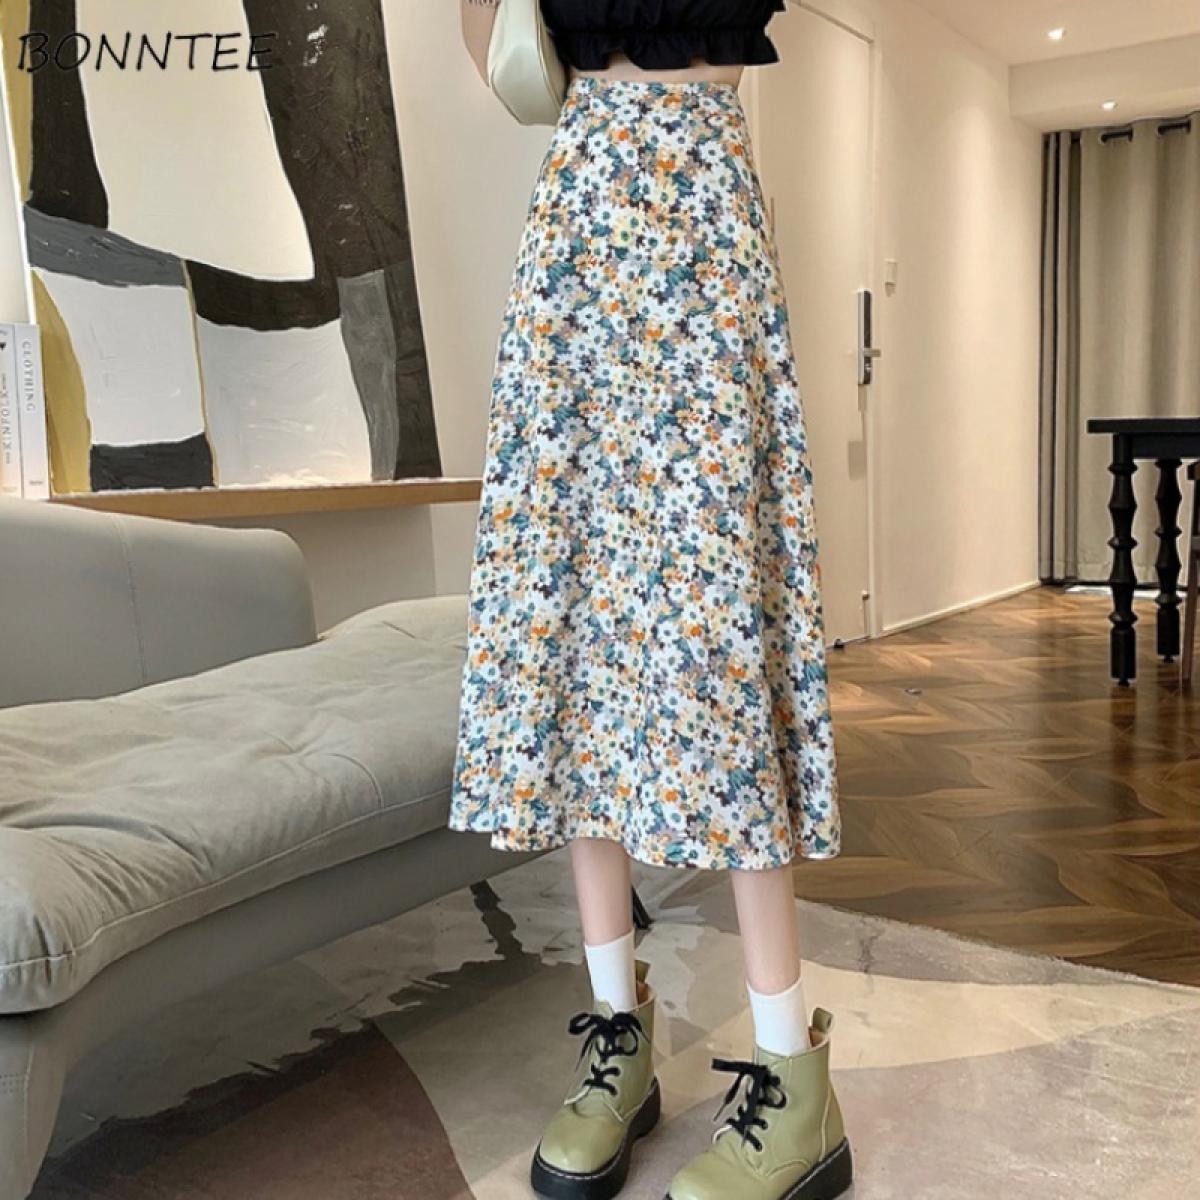 Floral Skirts Women Summer Trendy Chiffon New Arrival Aline Elegant Minority Young Hot Sale Fashion  Style Romantic Ins 